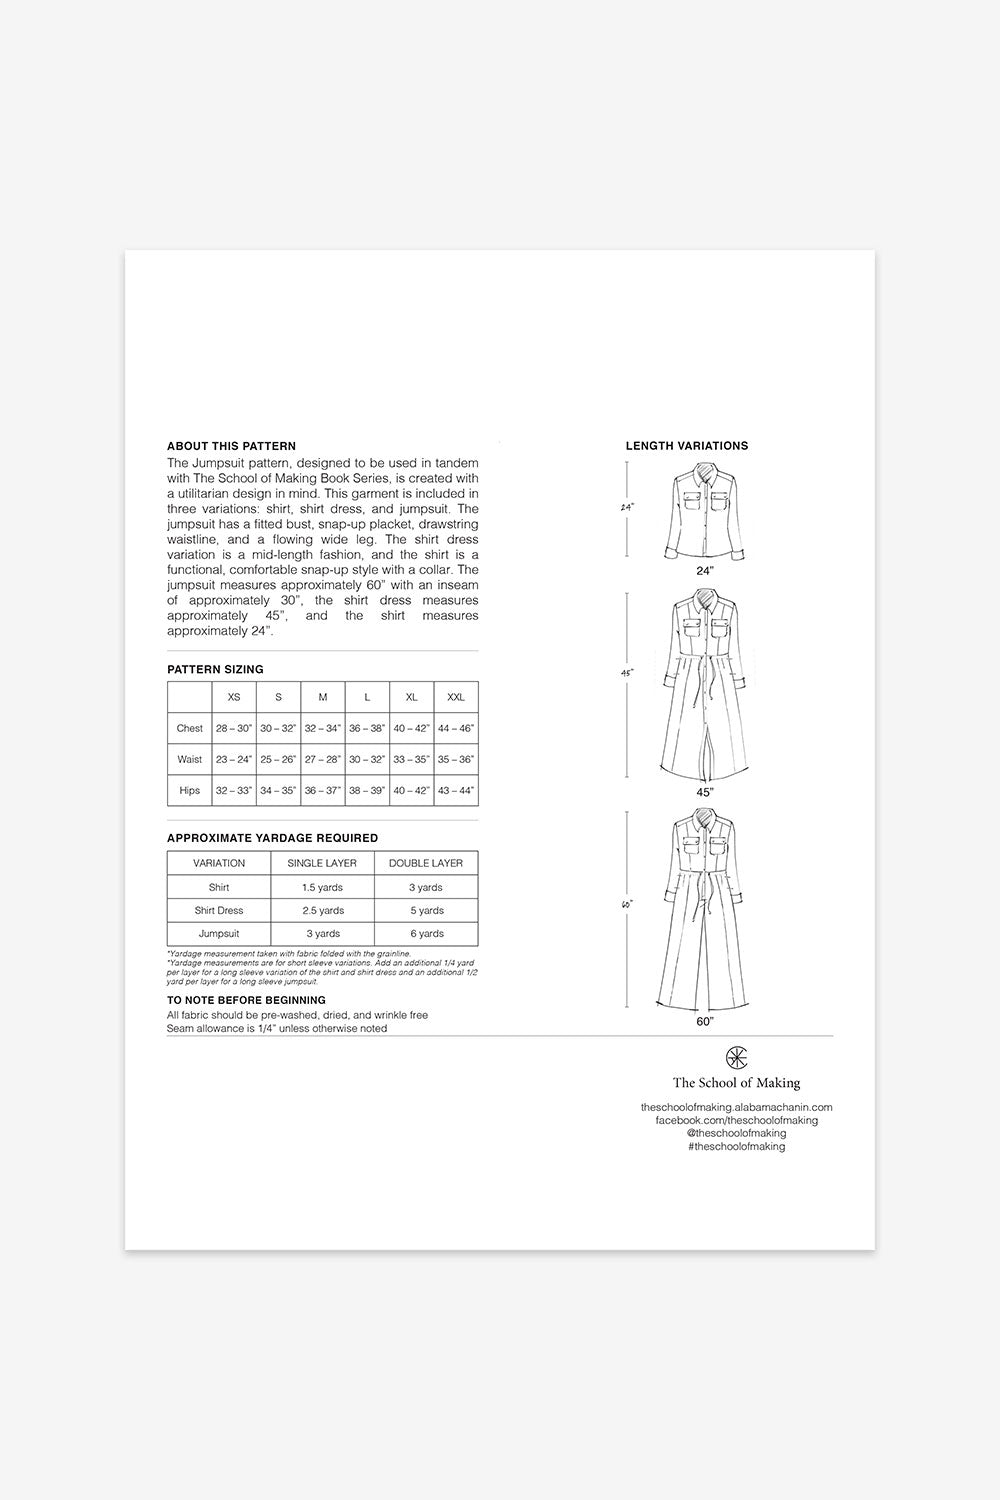 The School of Making The Jumpsuit Pattern with Dress, Shirt and Jumpsuit Pattern Variations